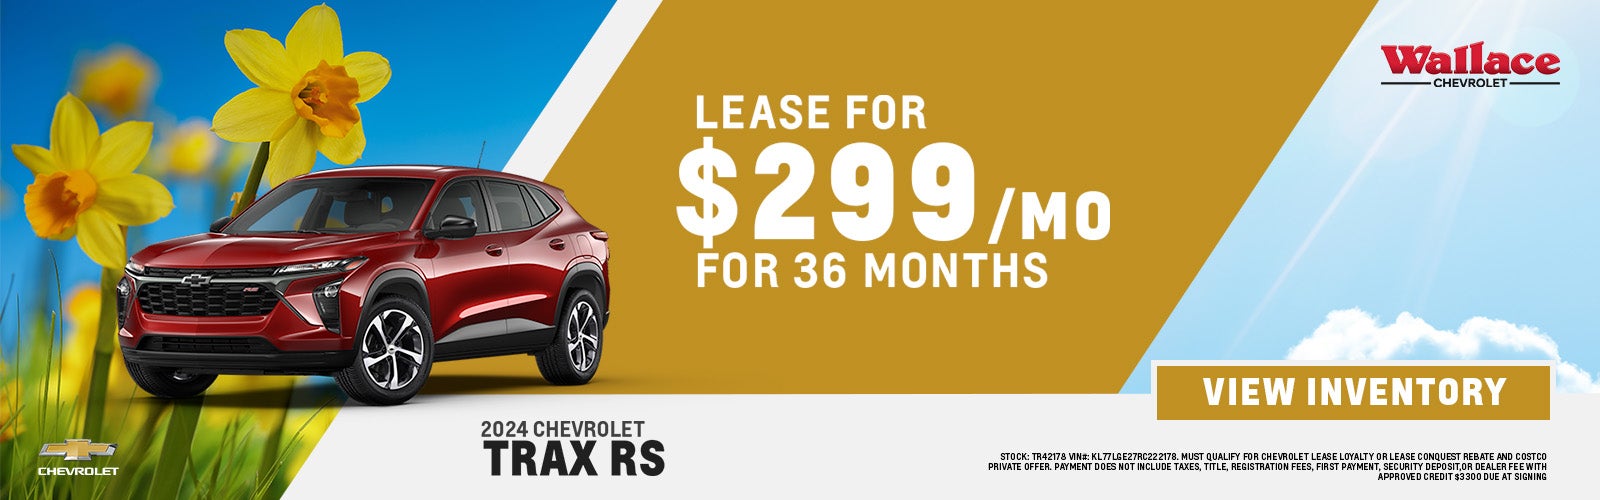 Chevy Trax Special Offer